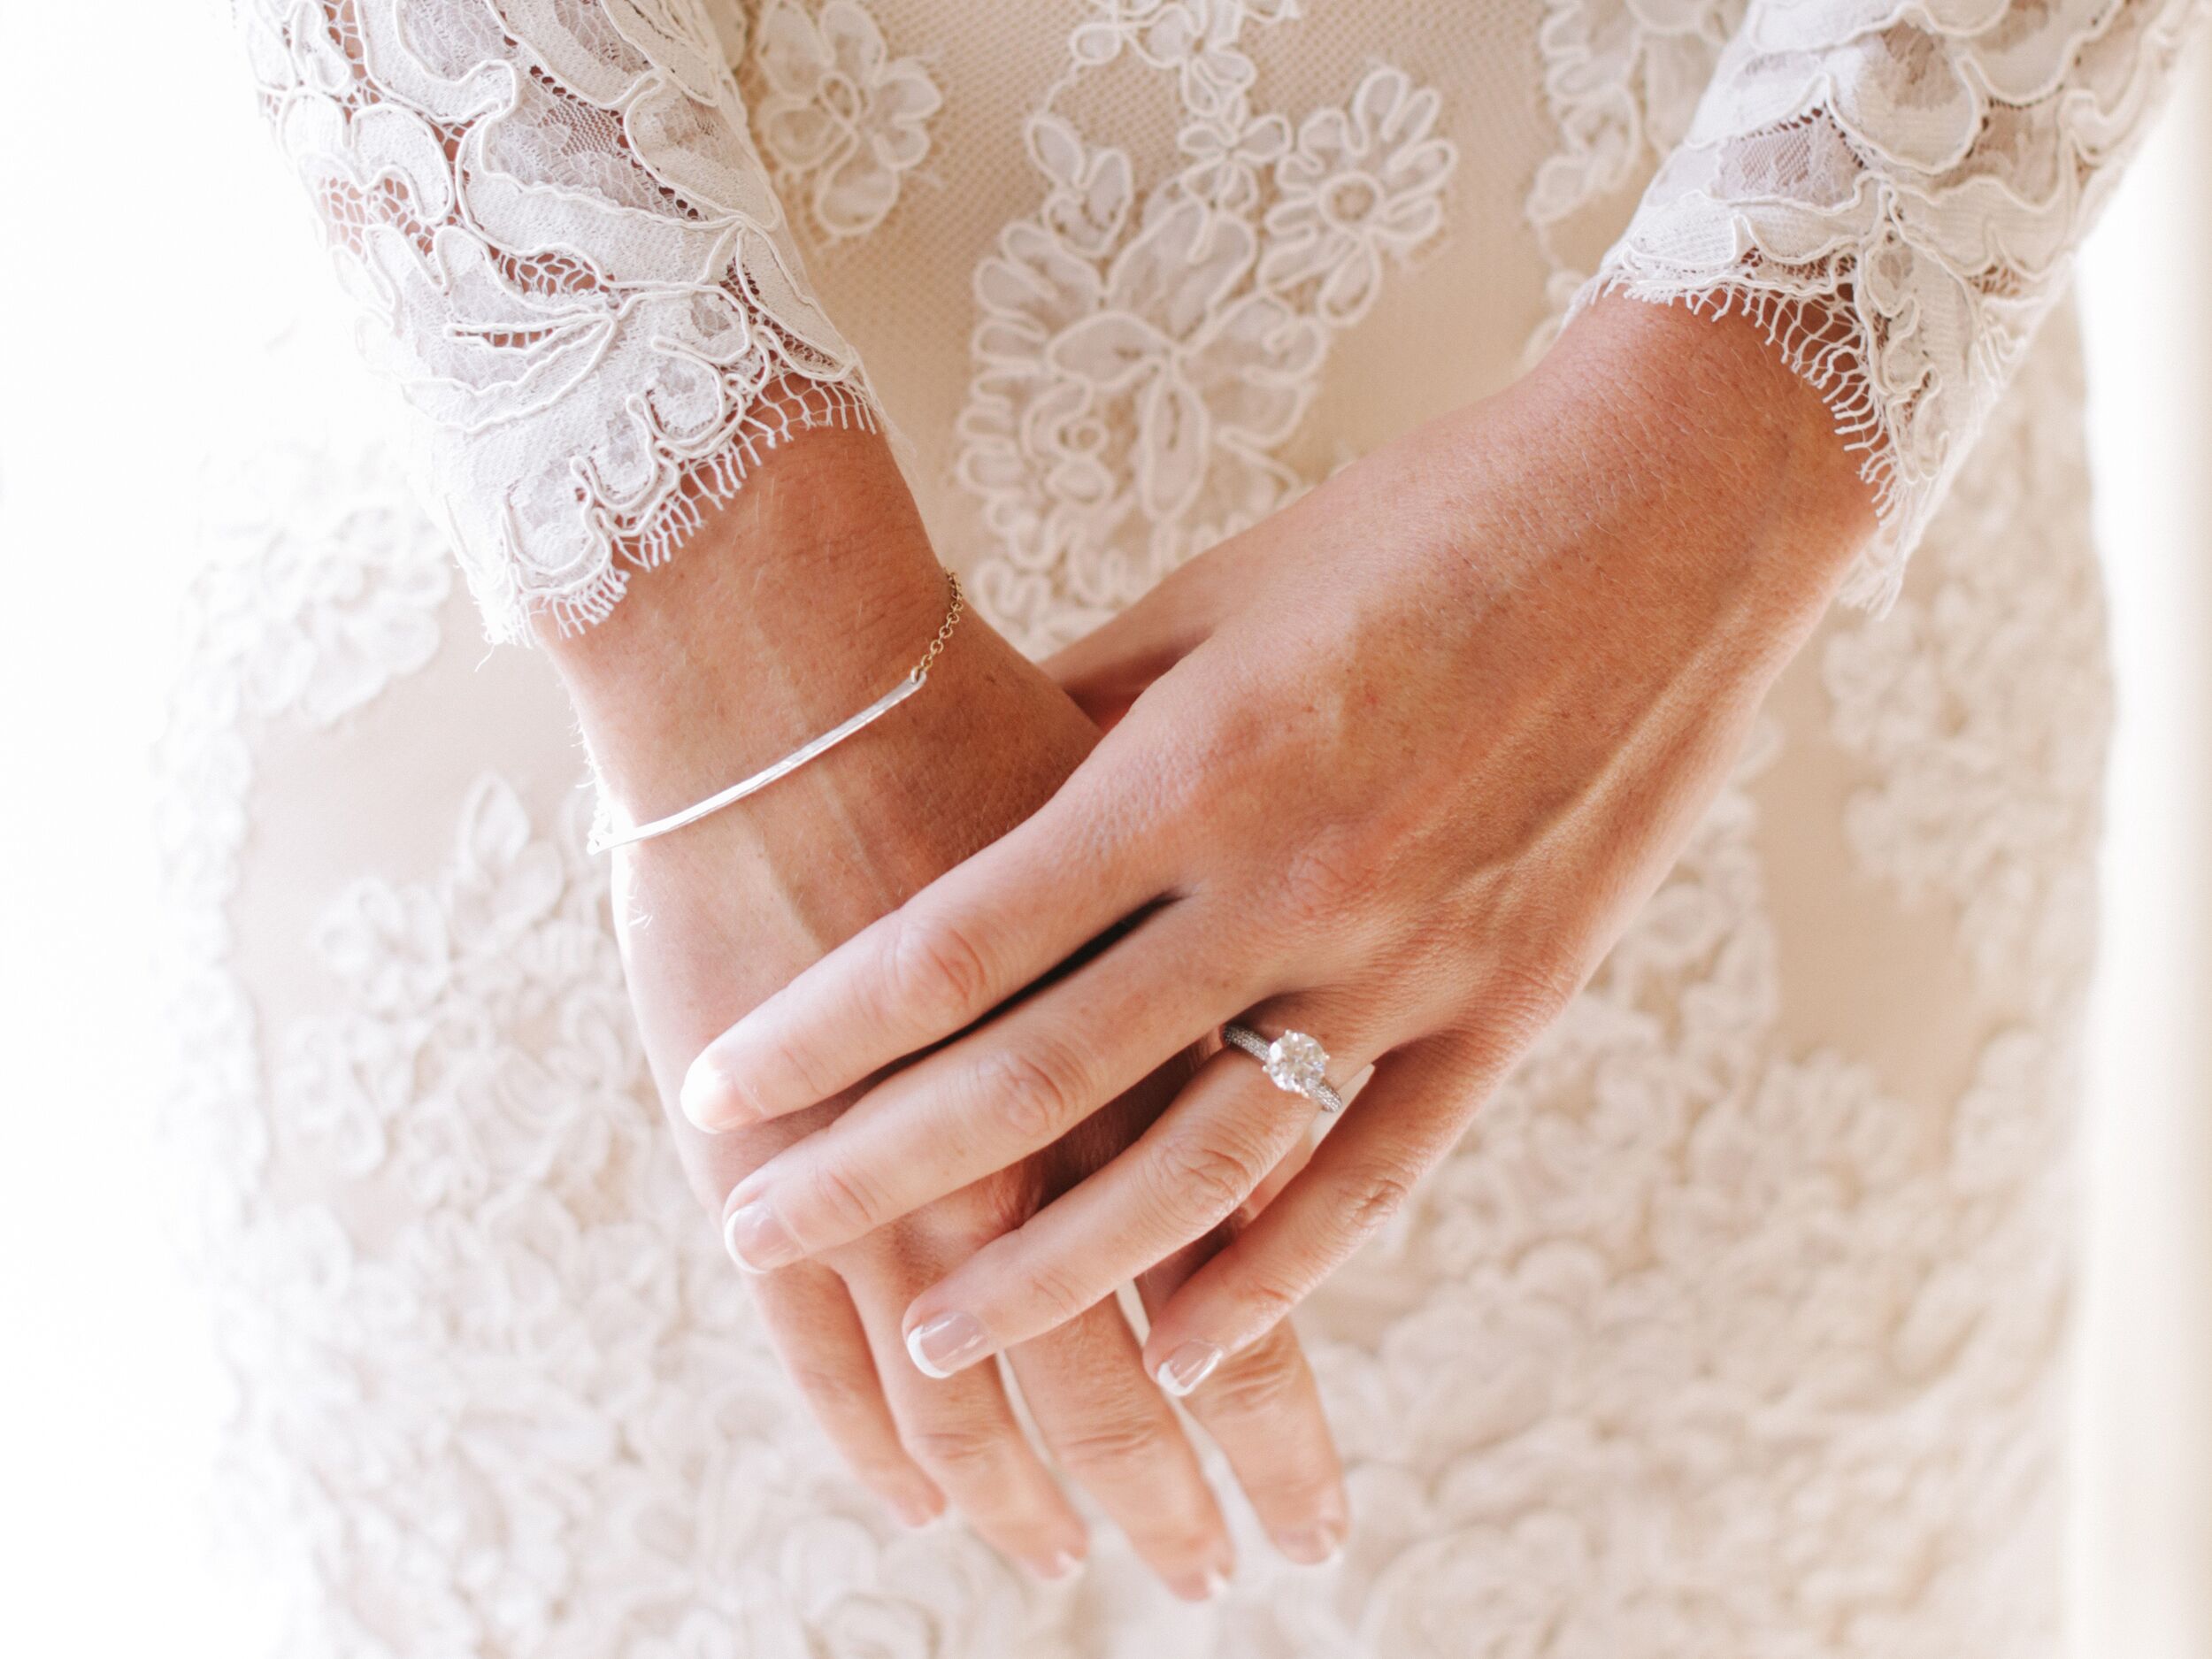 Ring Finger: What Hand Does Wedding and Engagement Ring Go On?